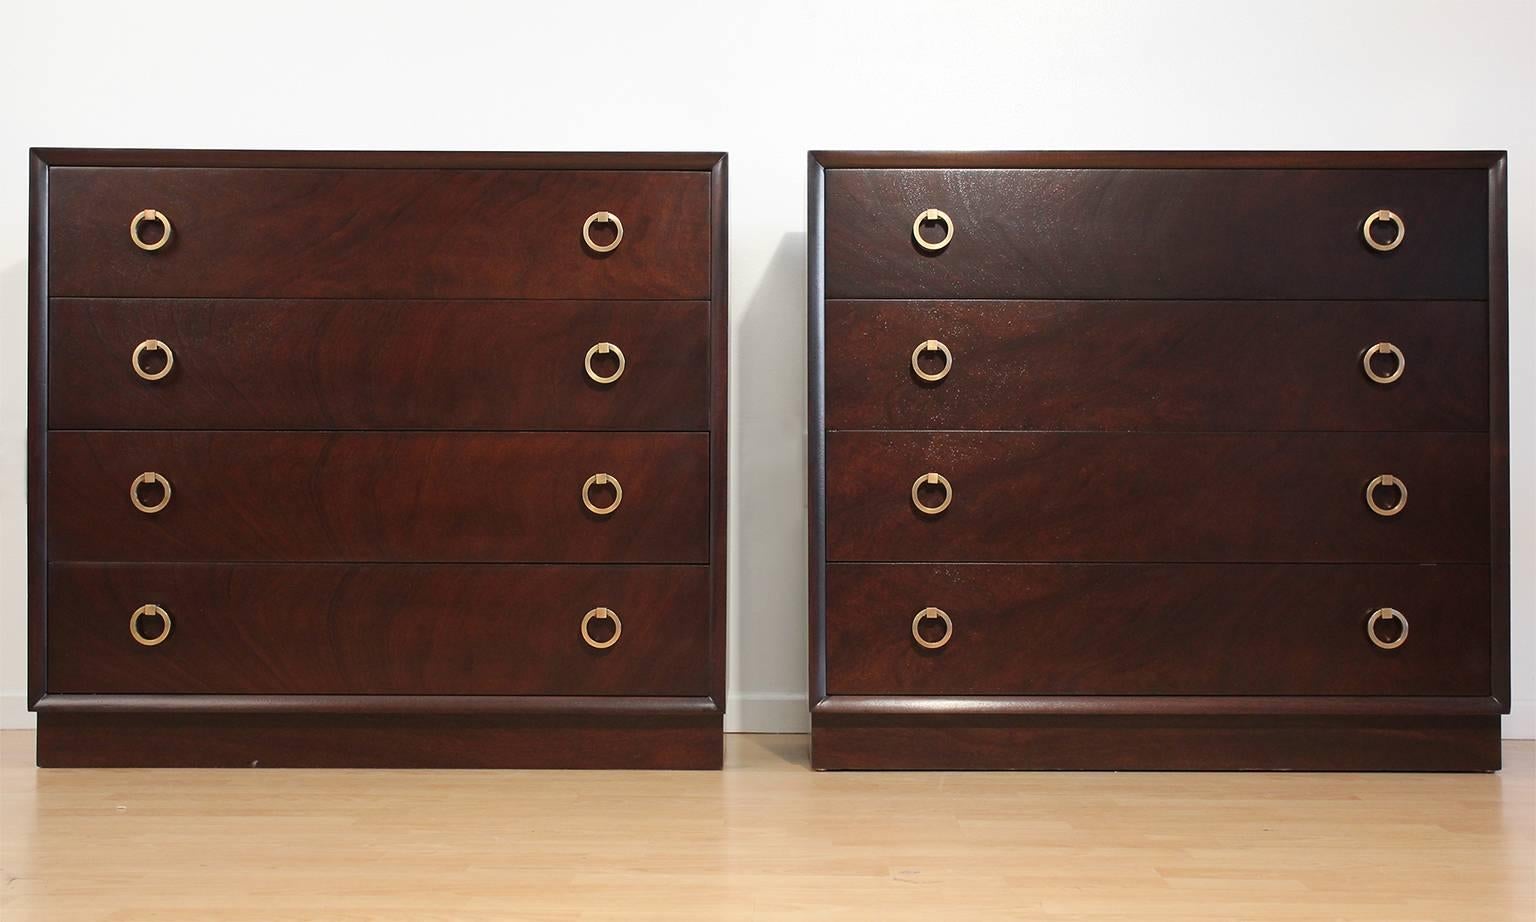 Pair of thin profile 4-drawer dressers or cabinets designed by T.H. Robsjohn-Gibbings for Widdicomb. These would also work well as oversized night stands. Please contact if you only need one cabinet. Restored.